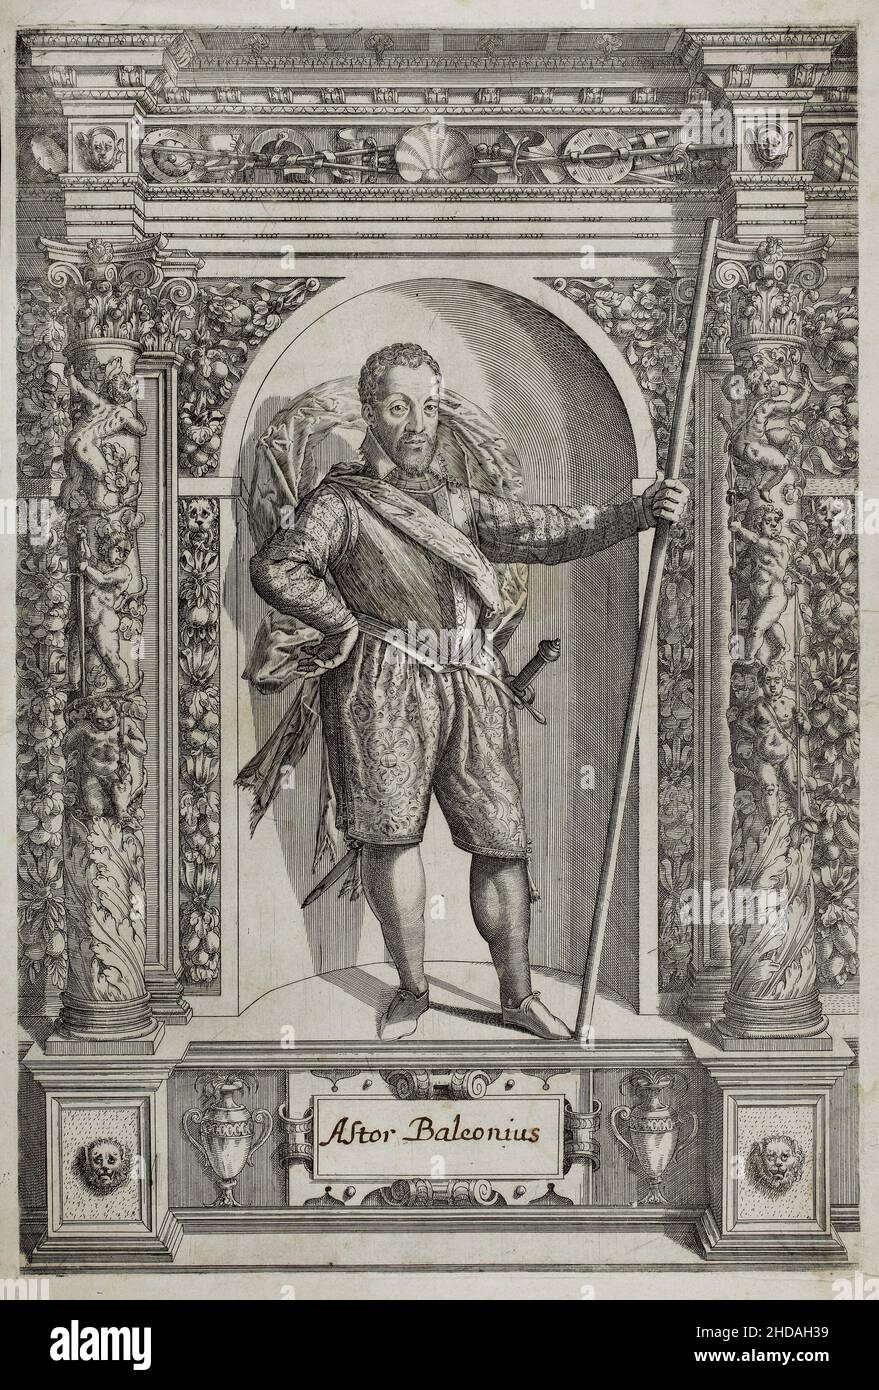 Engraving portrait of Astor Baleonius (d'Aleoni, Venetian general). 1601 This engraving from the book of the arms collection Archduke Ferdinand, it wa Stock Photo